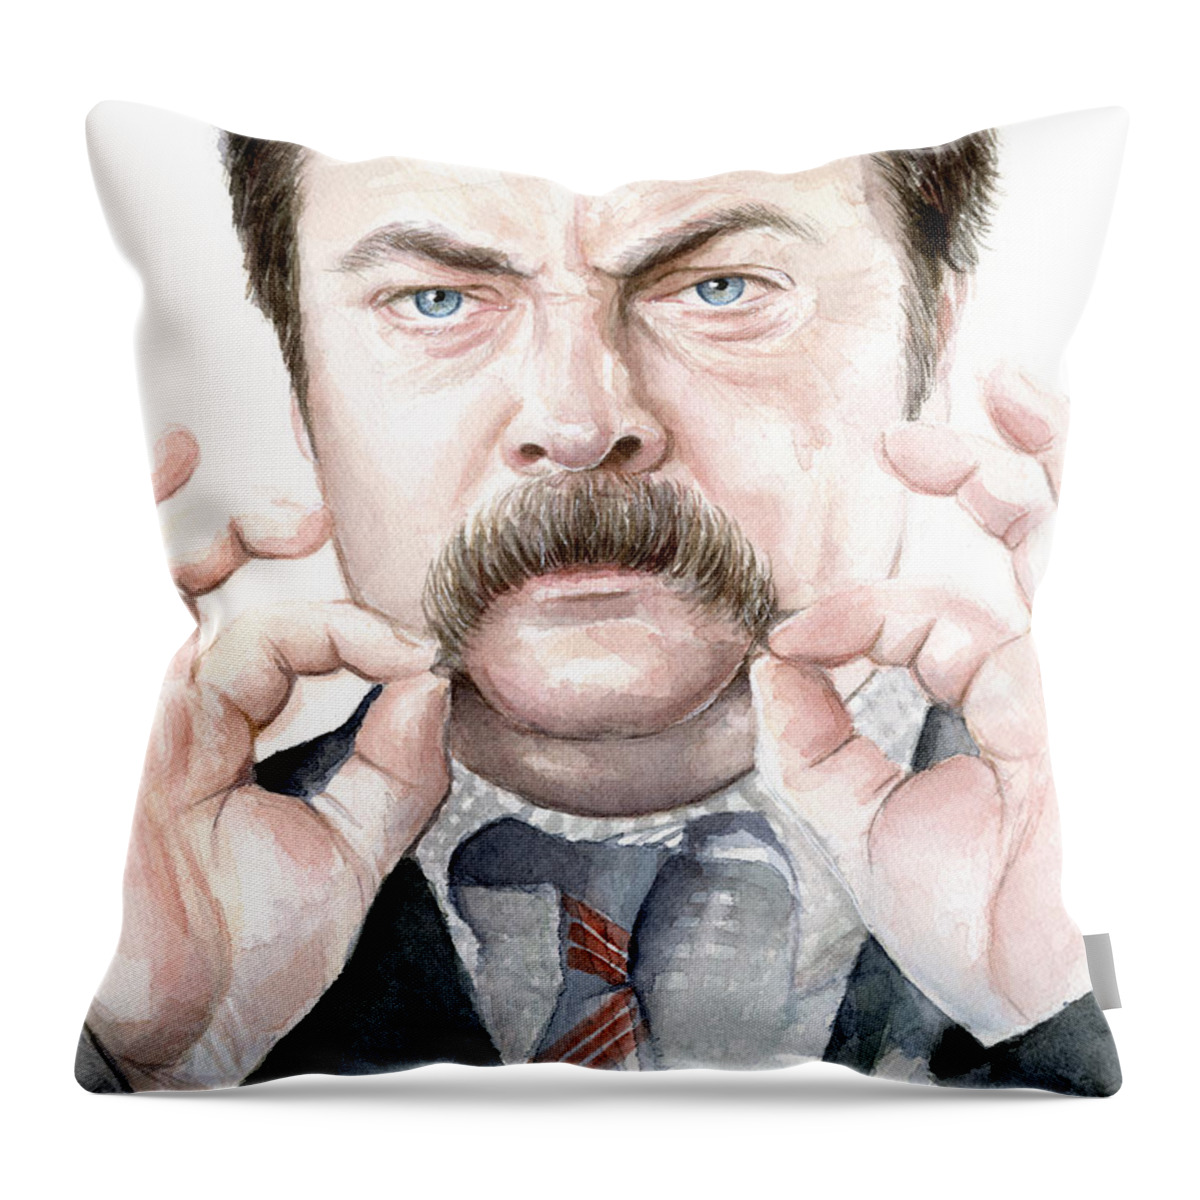 Ron Throw Pillow featuring the painting Ron Swanson Mustache Portrait by Olga Shvartsur